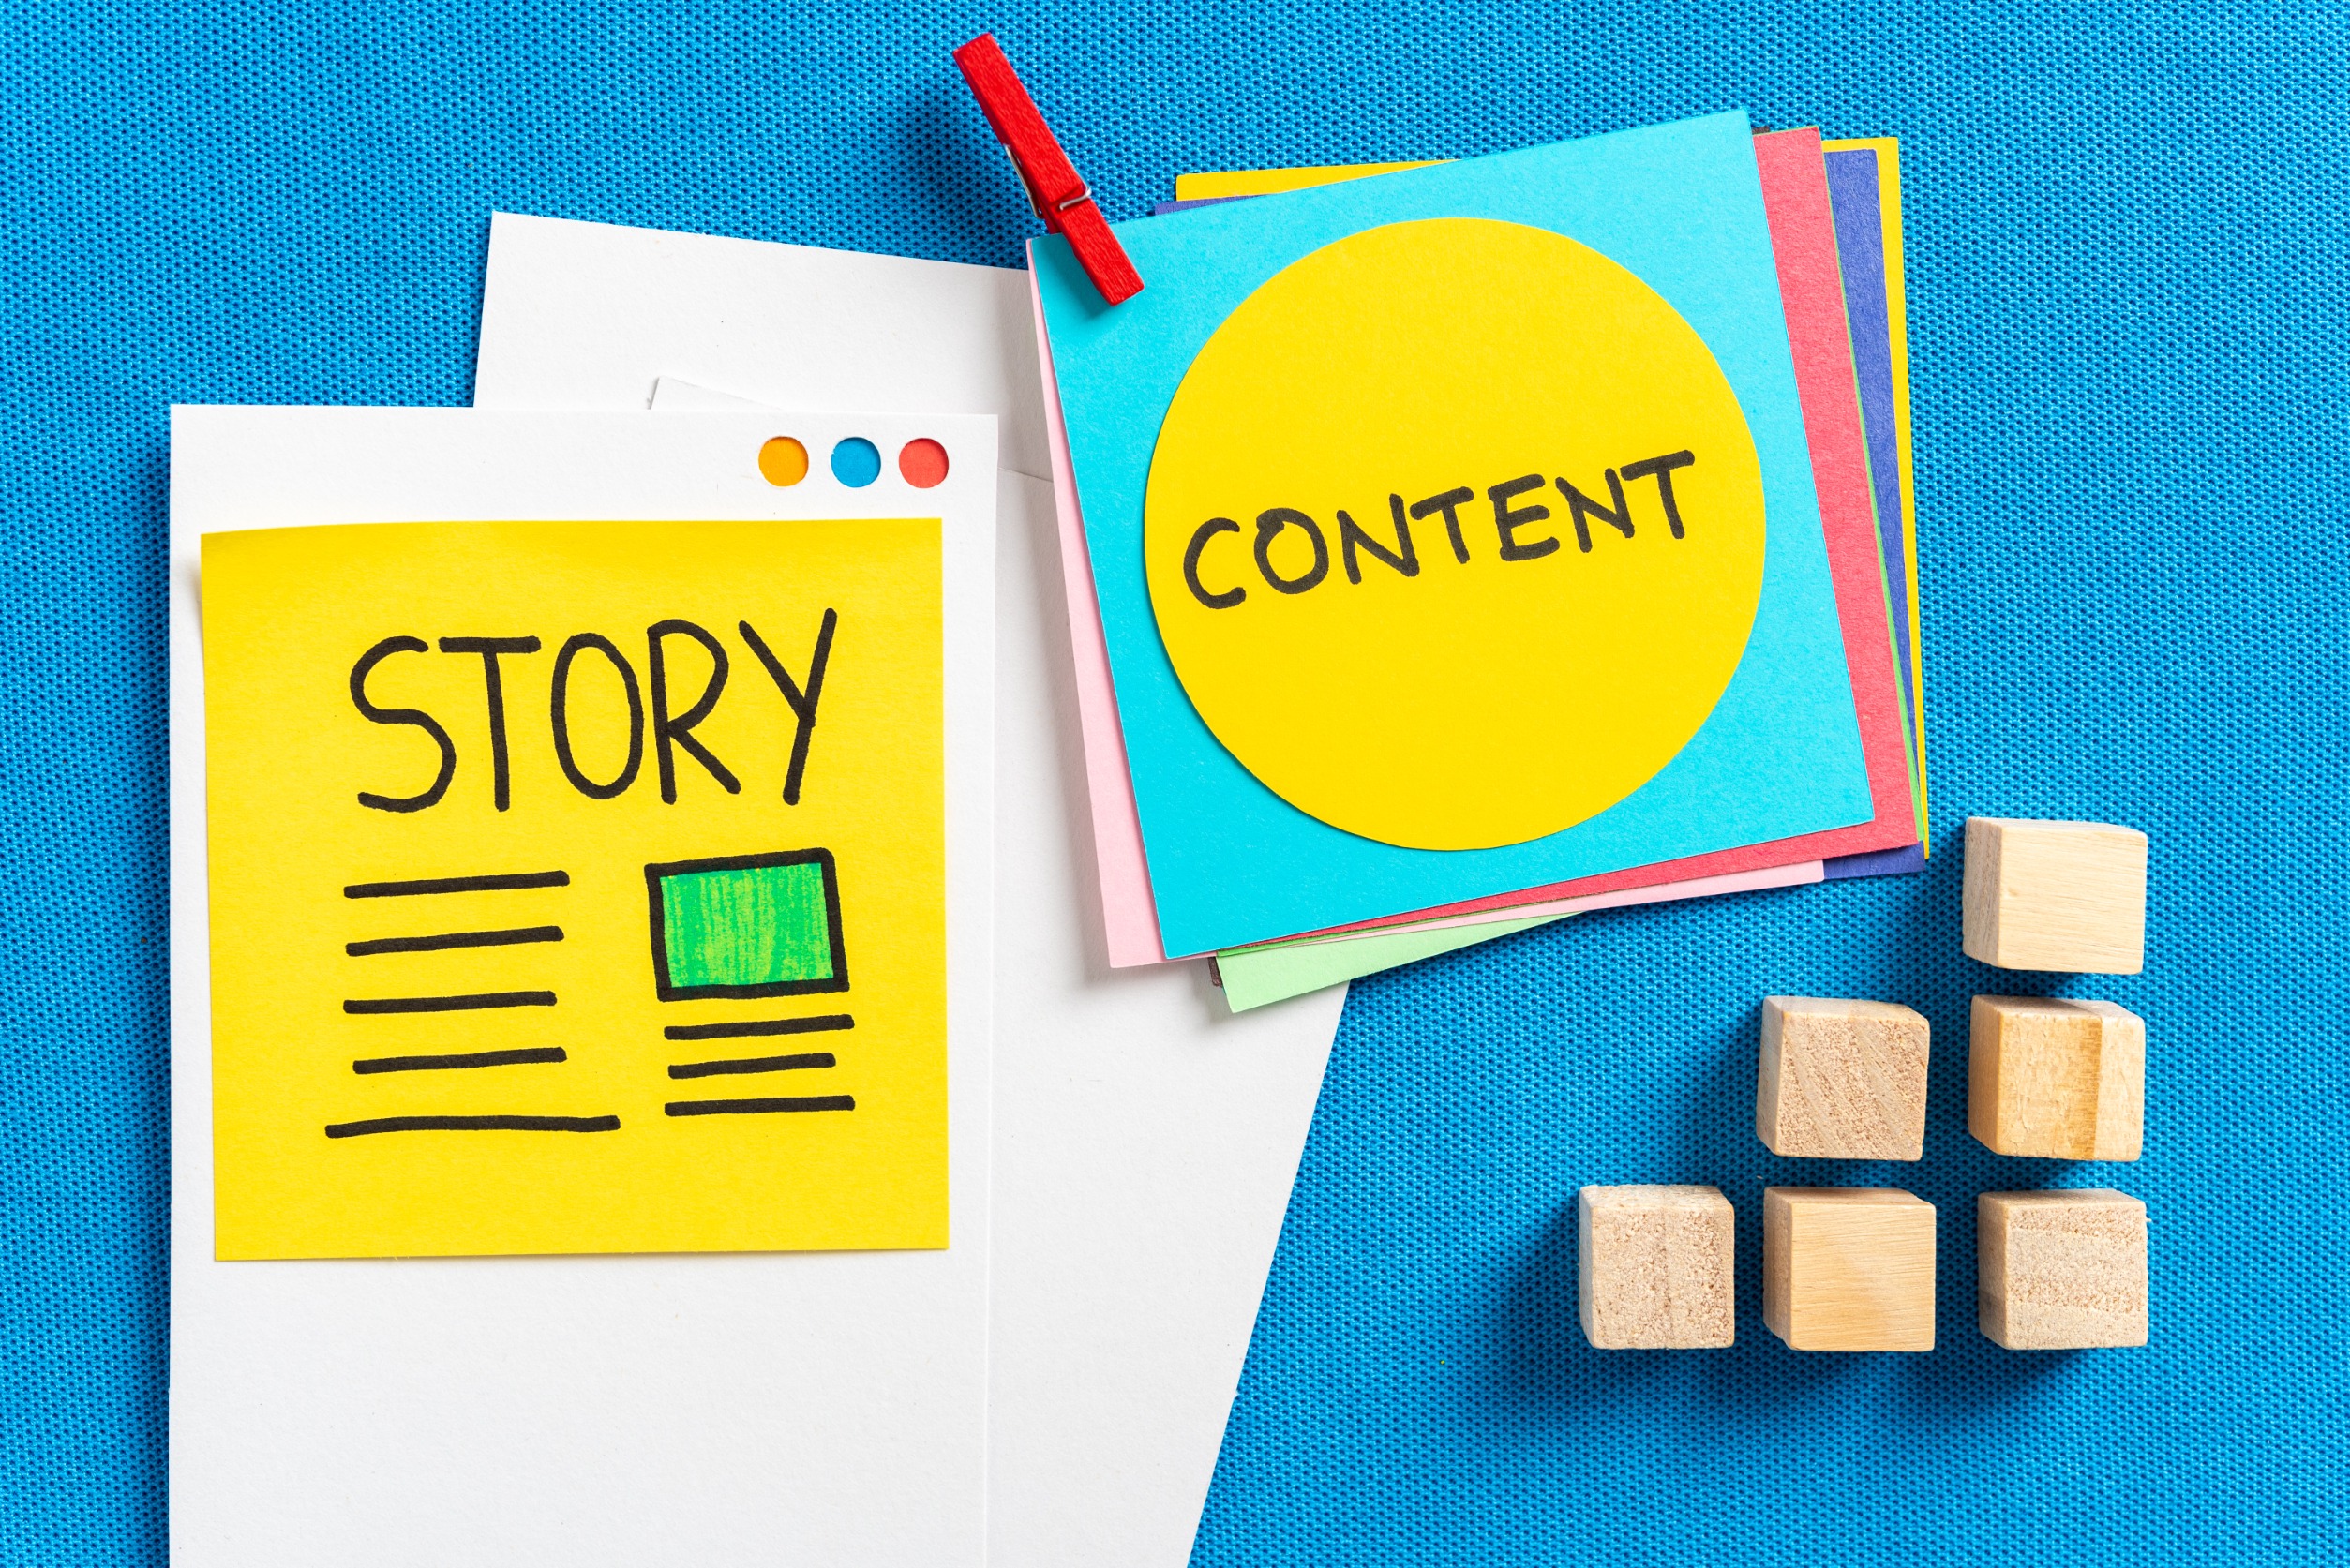 digital marketing concept made with paper cards with the words illustrated "story" and "content"